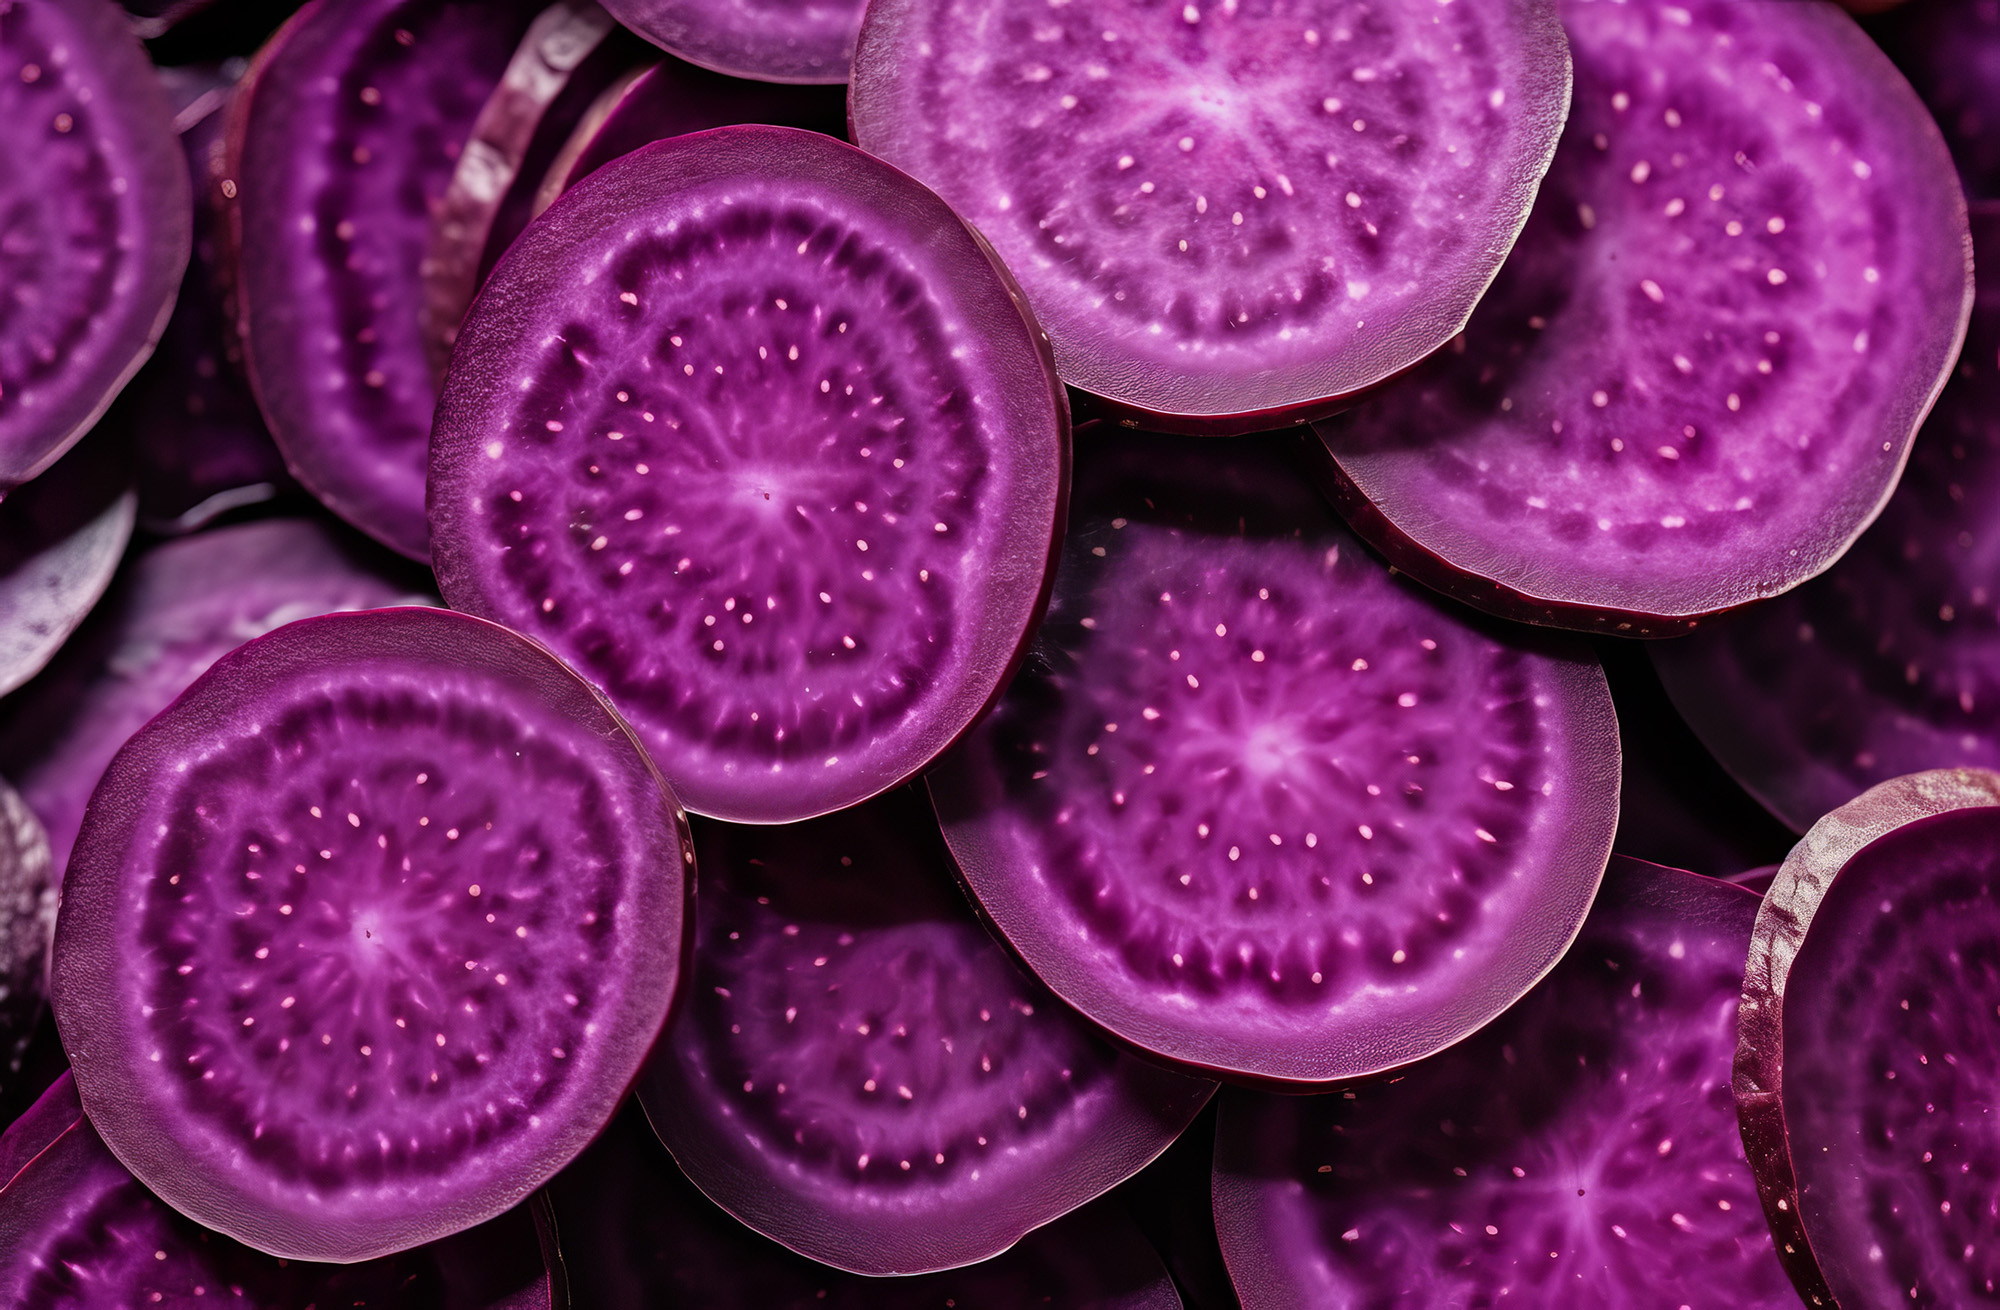 Purple vegetable with seeds sliced background